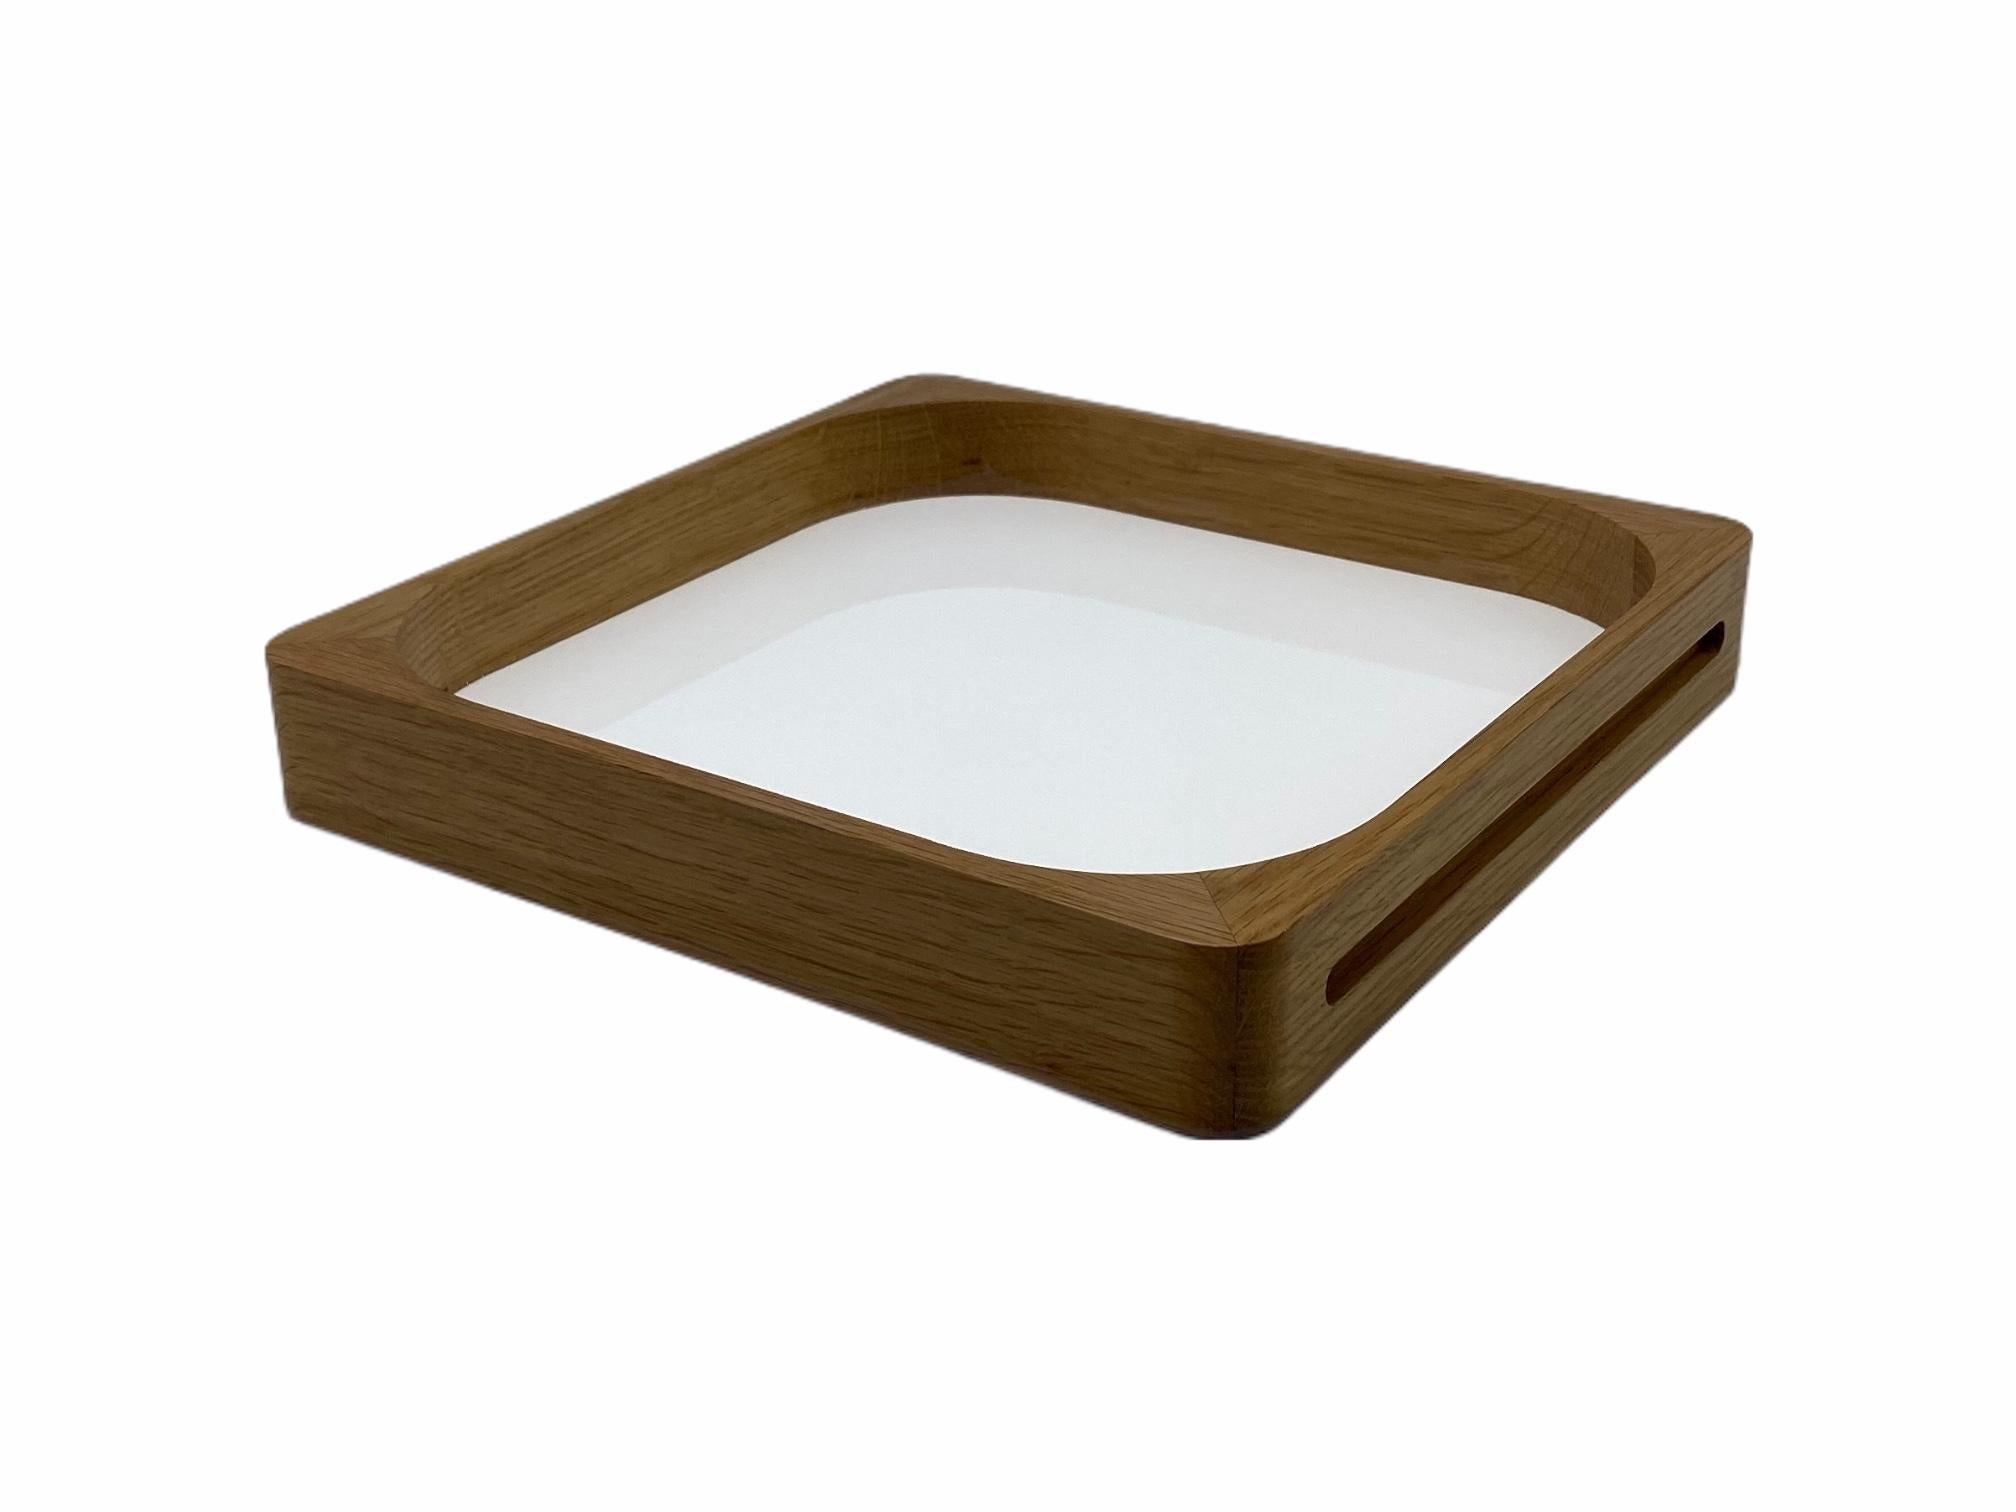 This classic, yet modern, craftsmanship based tray is made out of Oak wood and acrylic and was designed by GS in 2004. It can be used by clients as a cocktail tray as well as a very modern and practical serving tray, making it the perfect gift. The